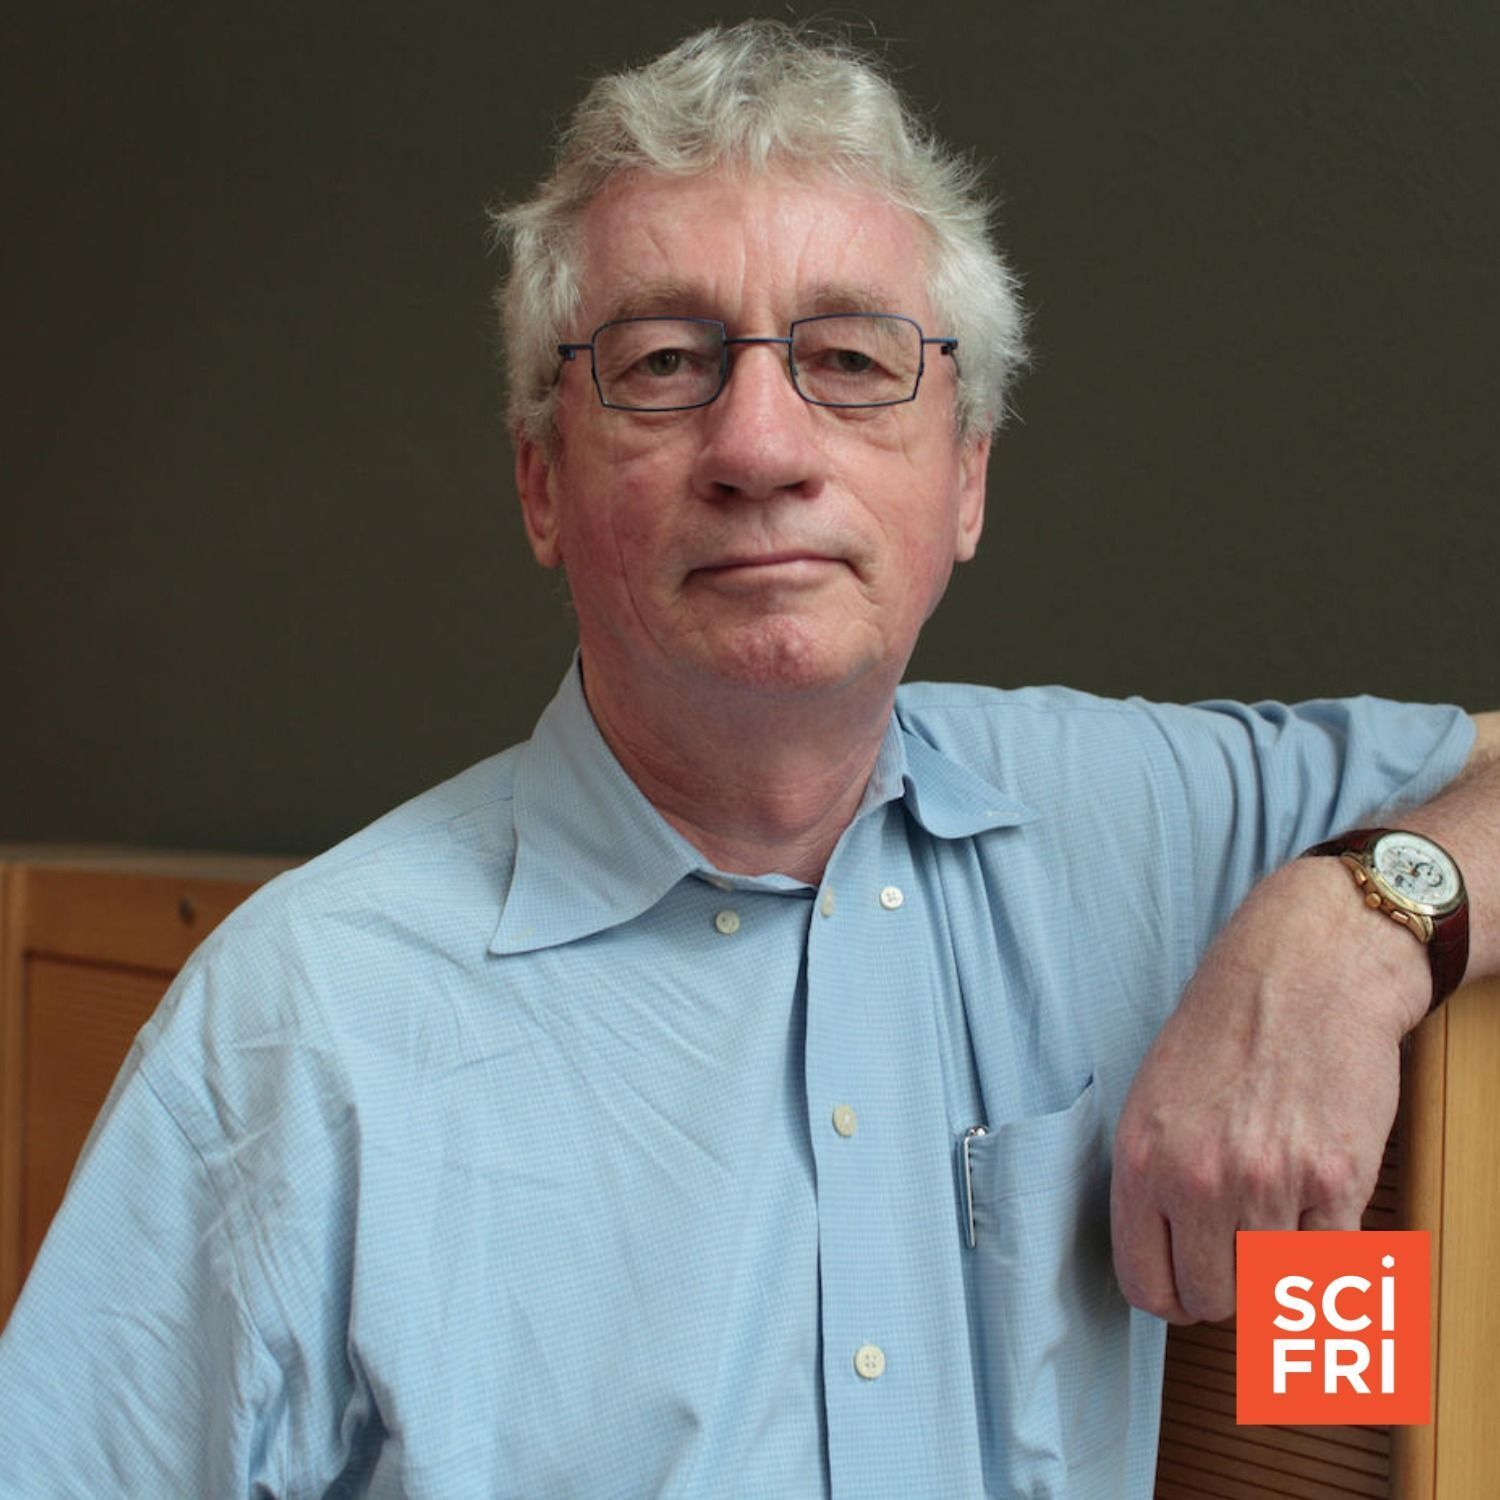 738: The Legacy Of Primatologist Frans de Waal